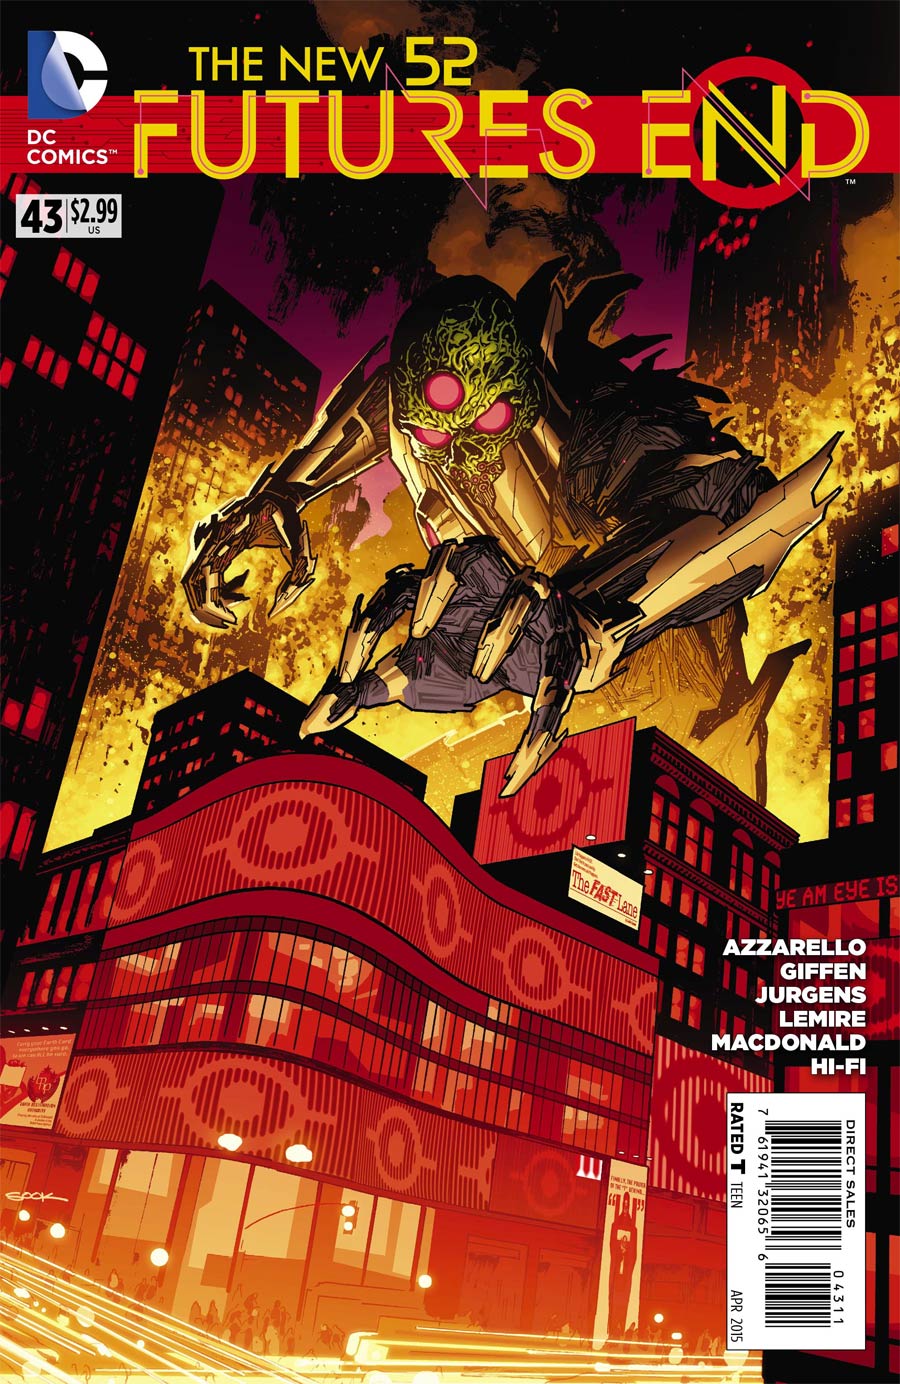 New 52 Futures End #43